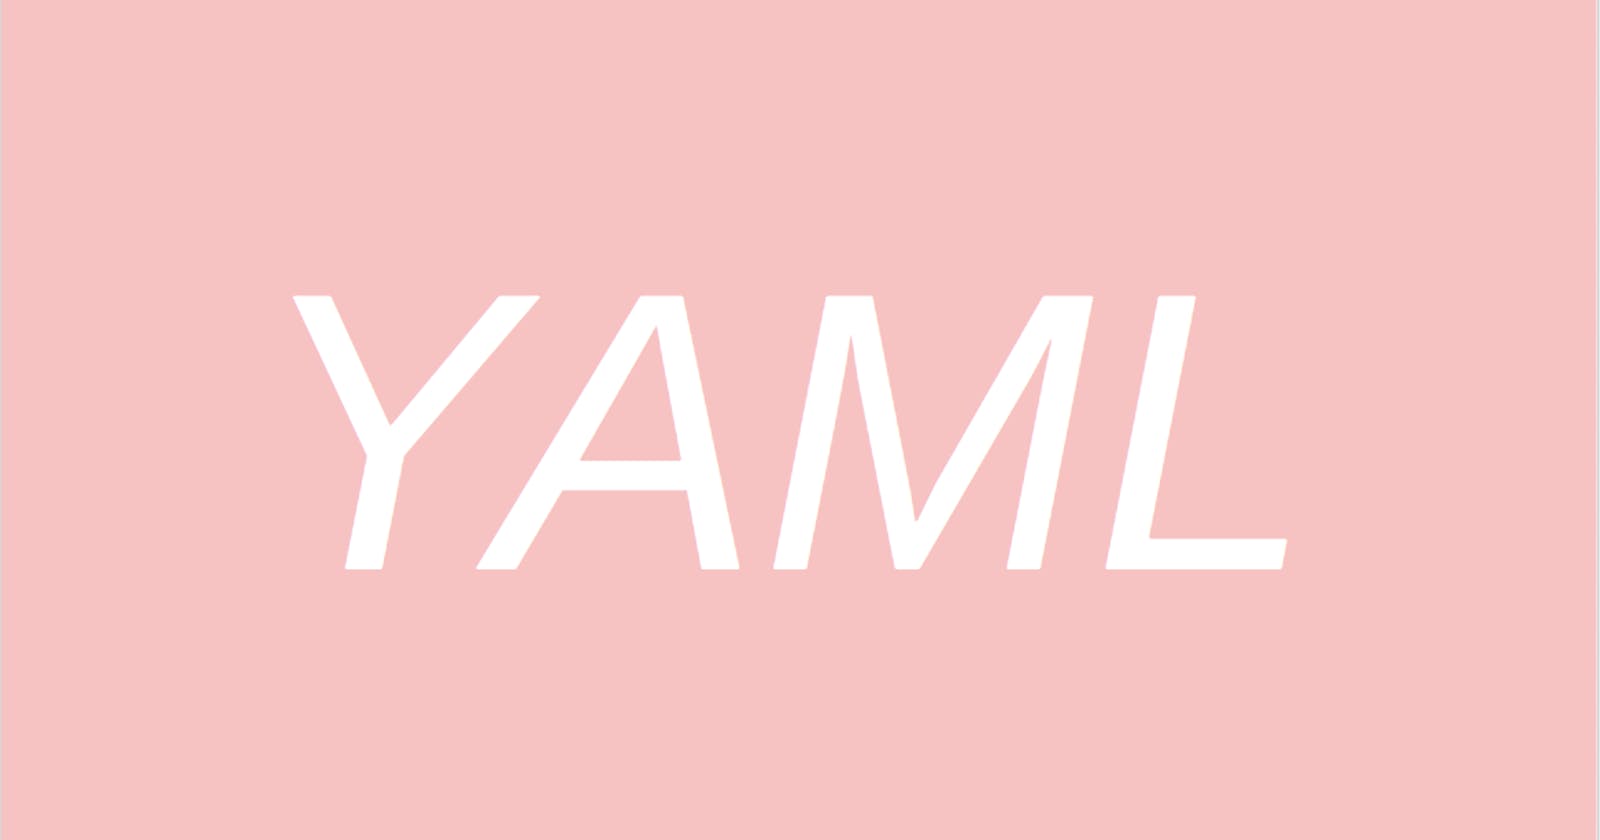 Complete Guide to YAML!